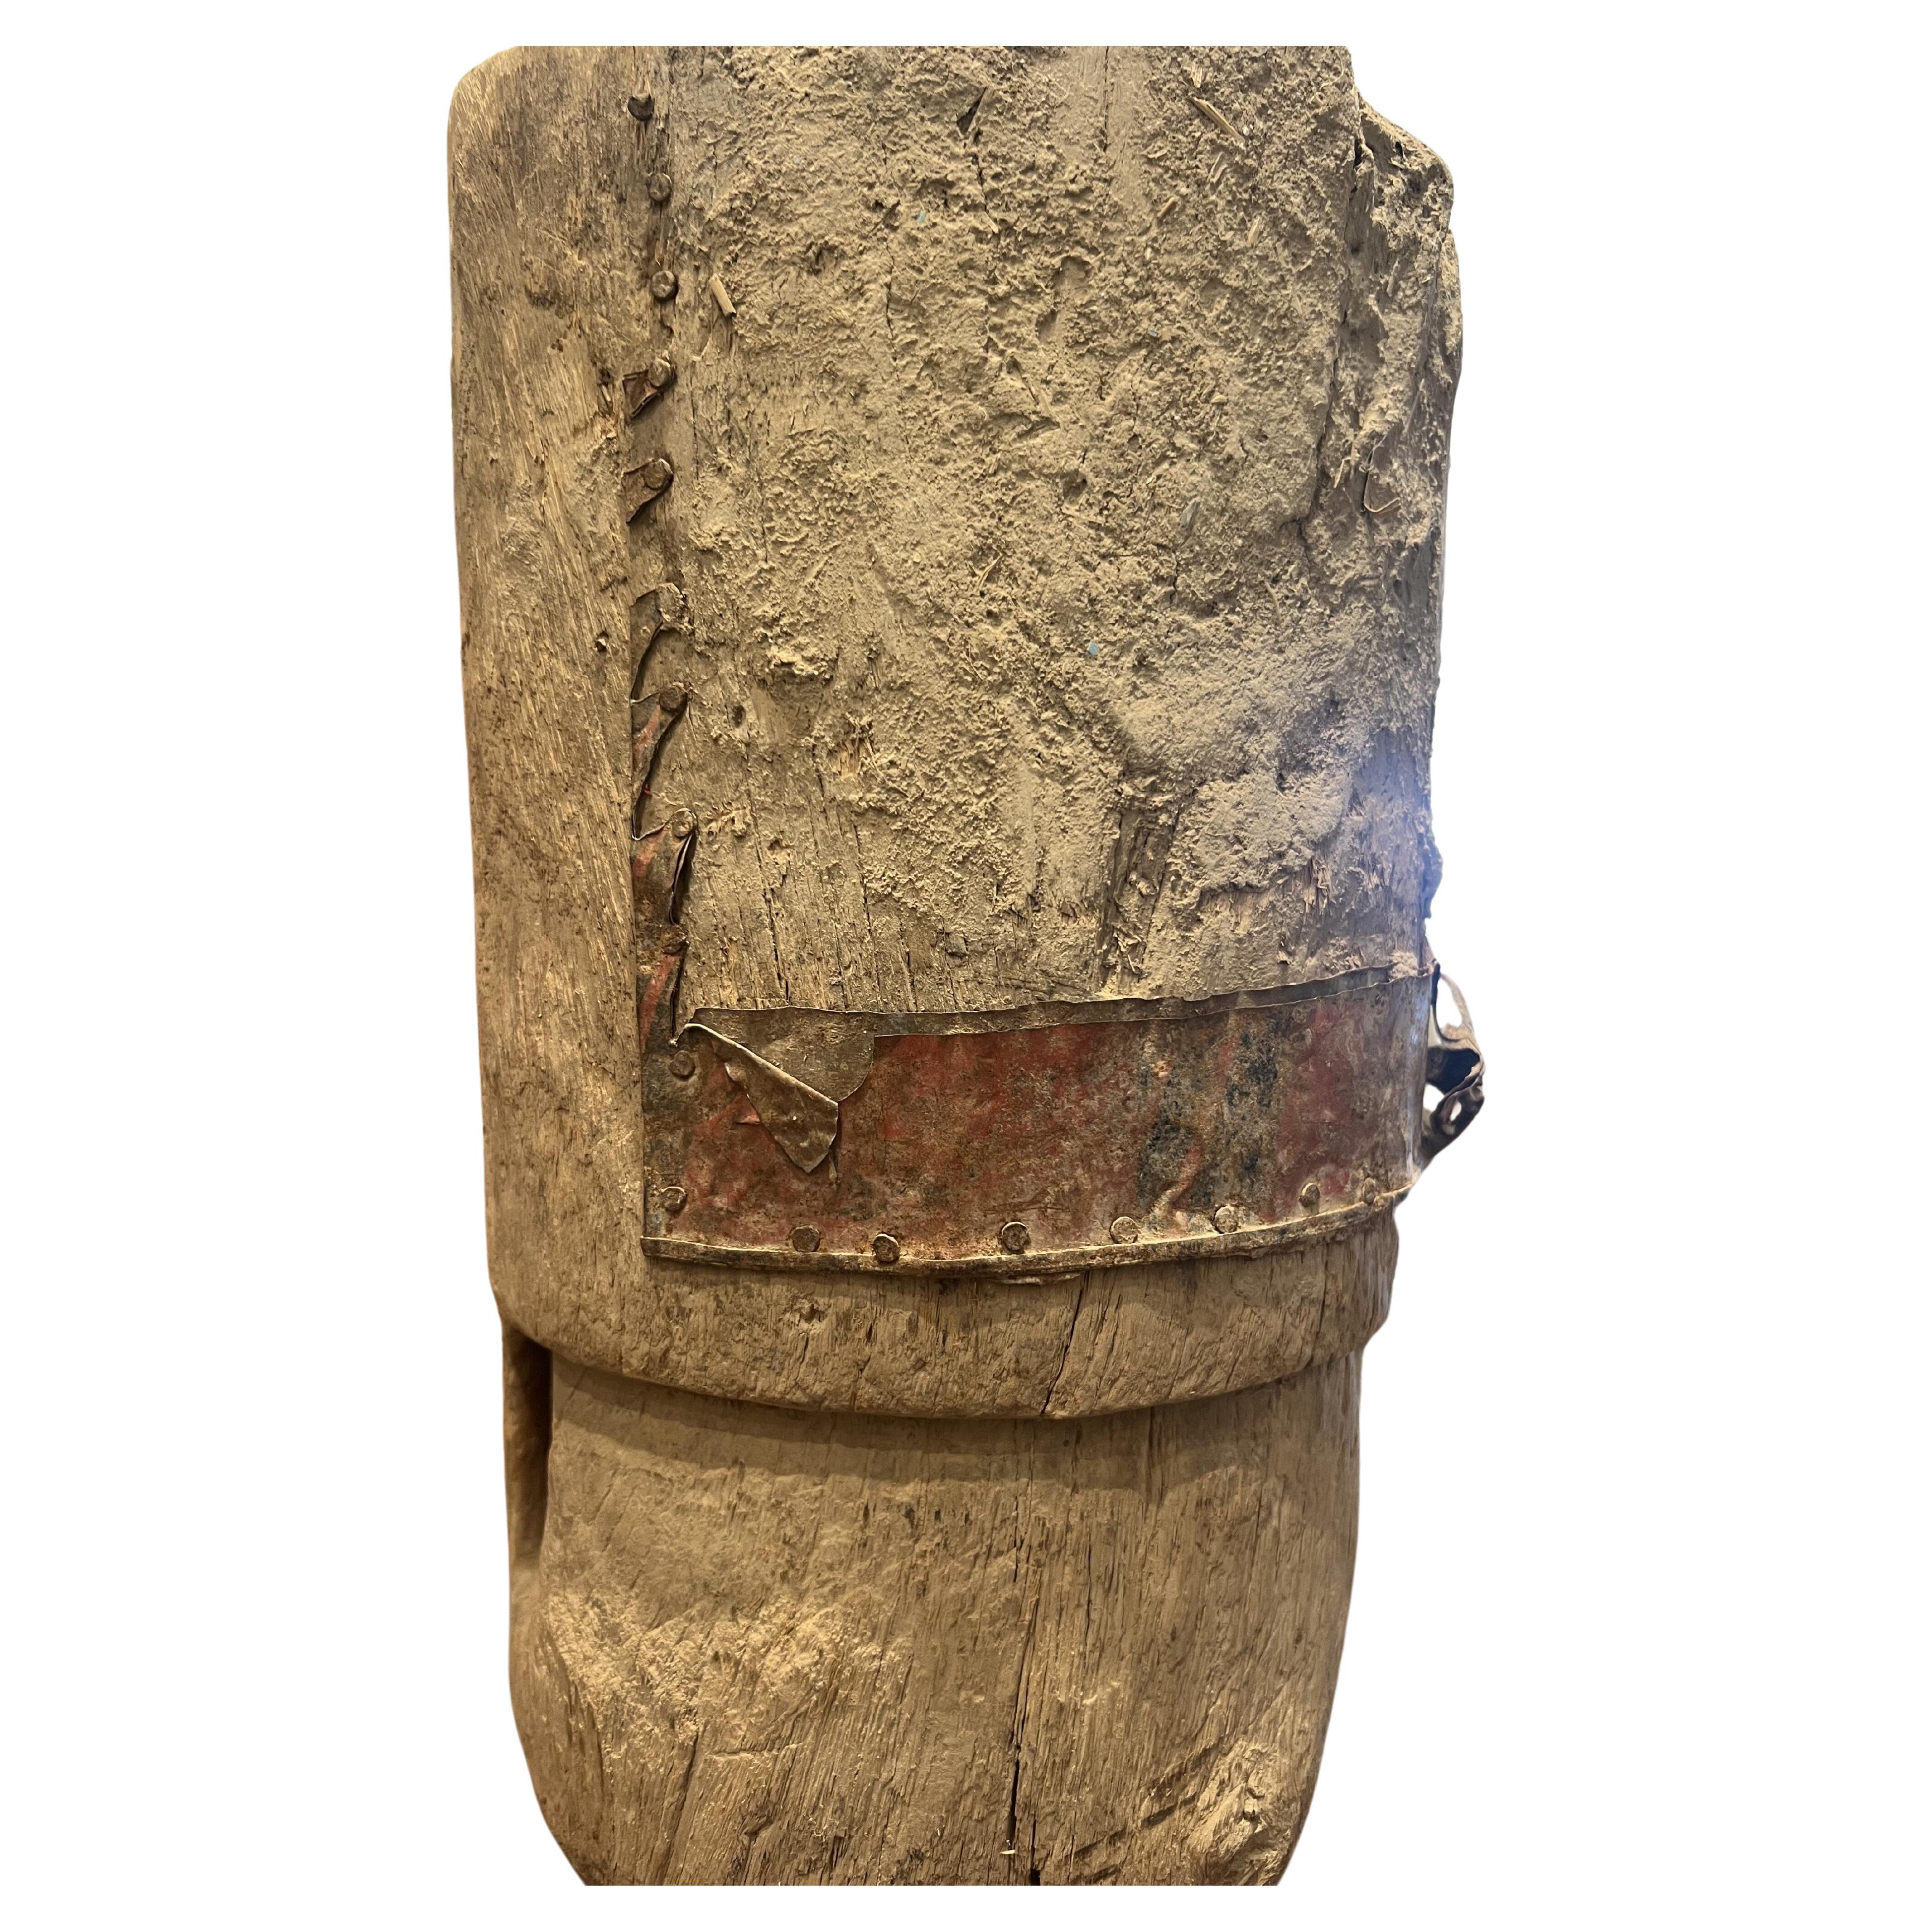 19th century small wooden/metal Mortar 


This exquisite mortar, dating back to the 19th century and originating from the region along the Yemen-Saudi border, is a captivating blend of functionality and artistry. Standing at an impressive height of